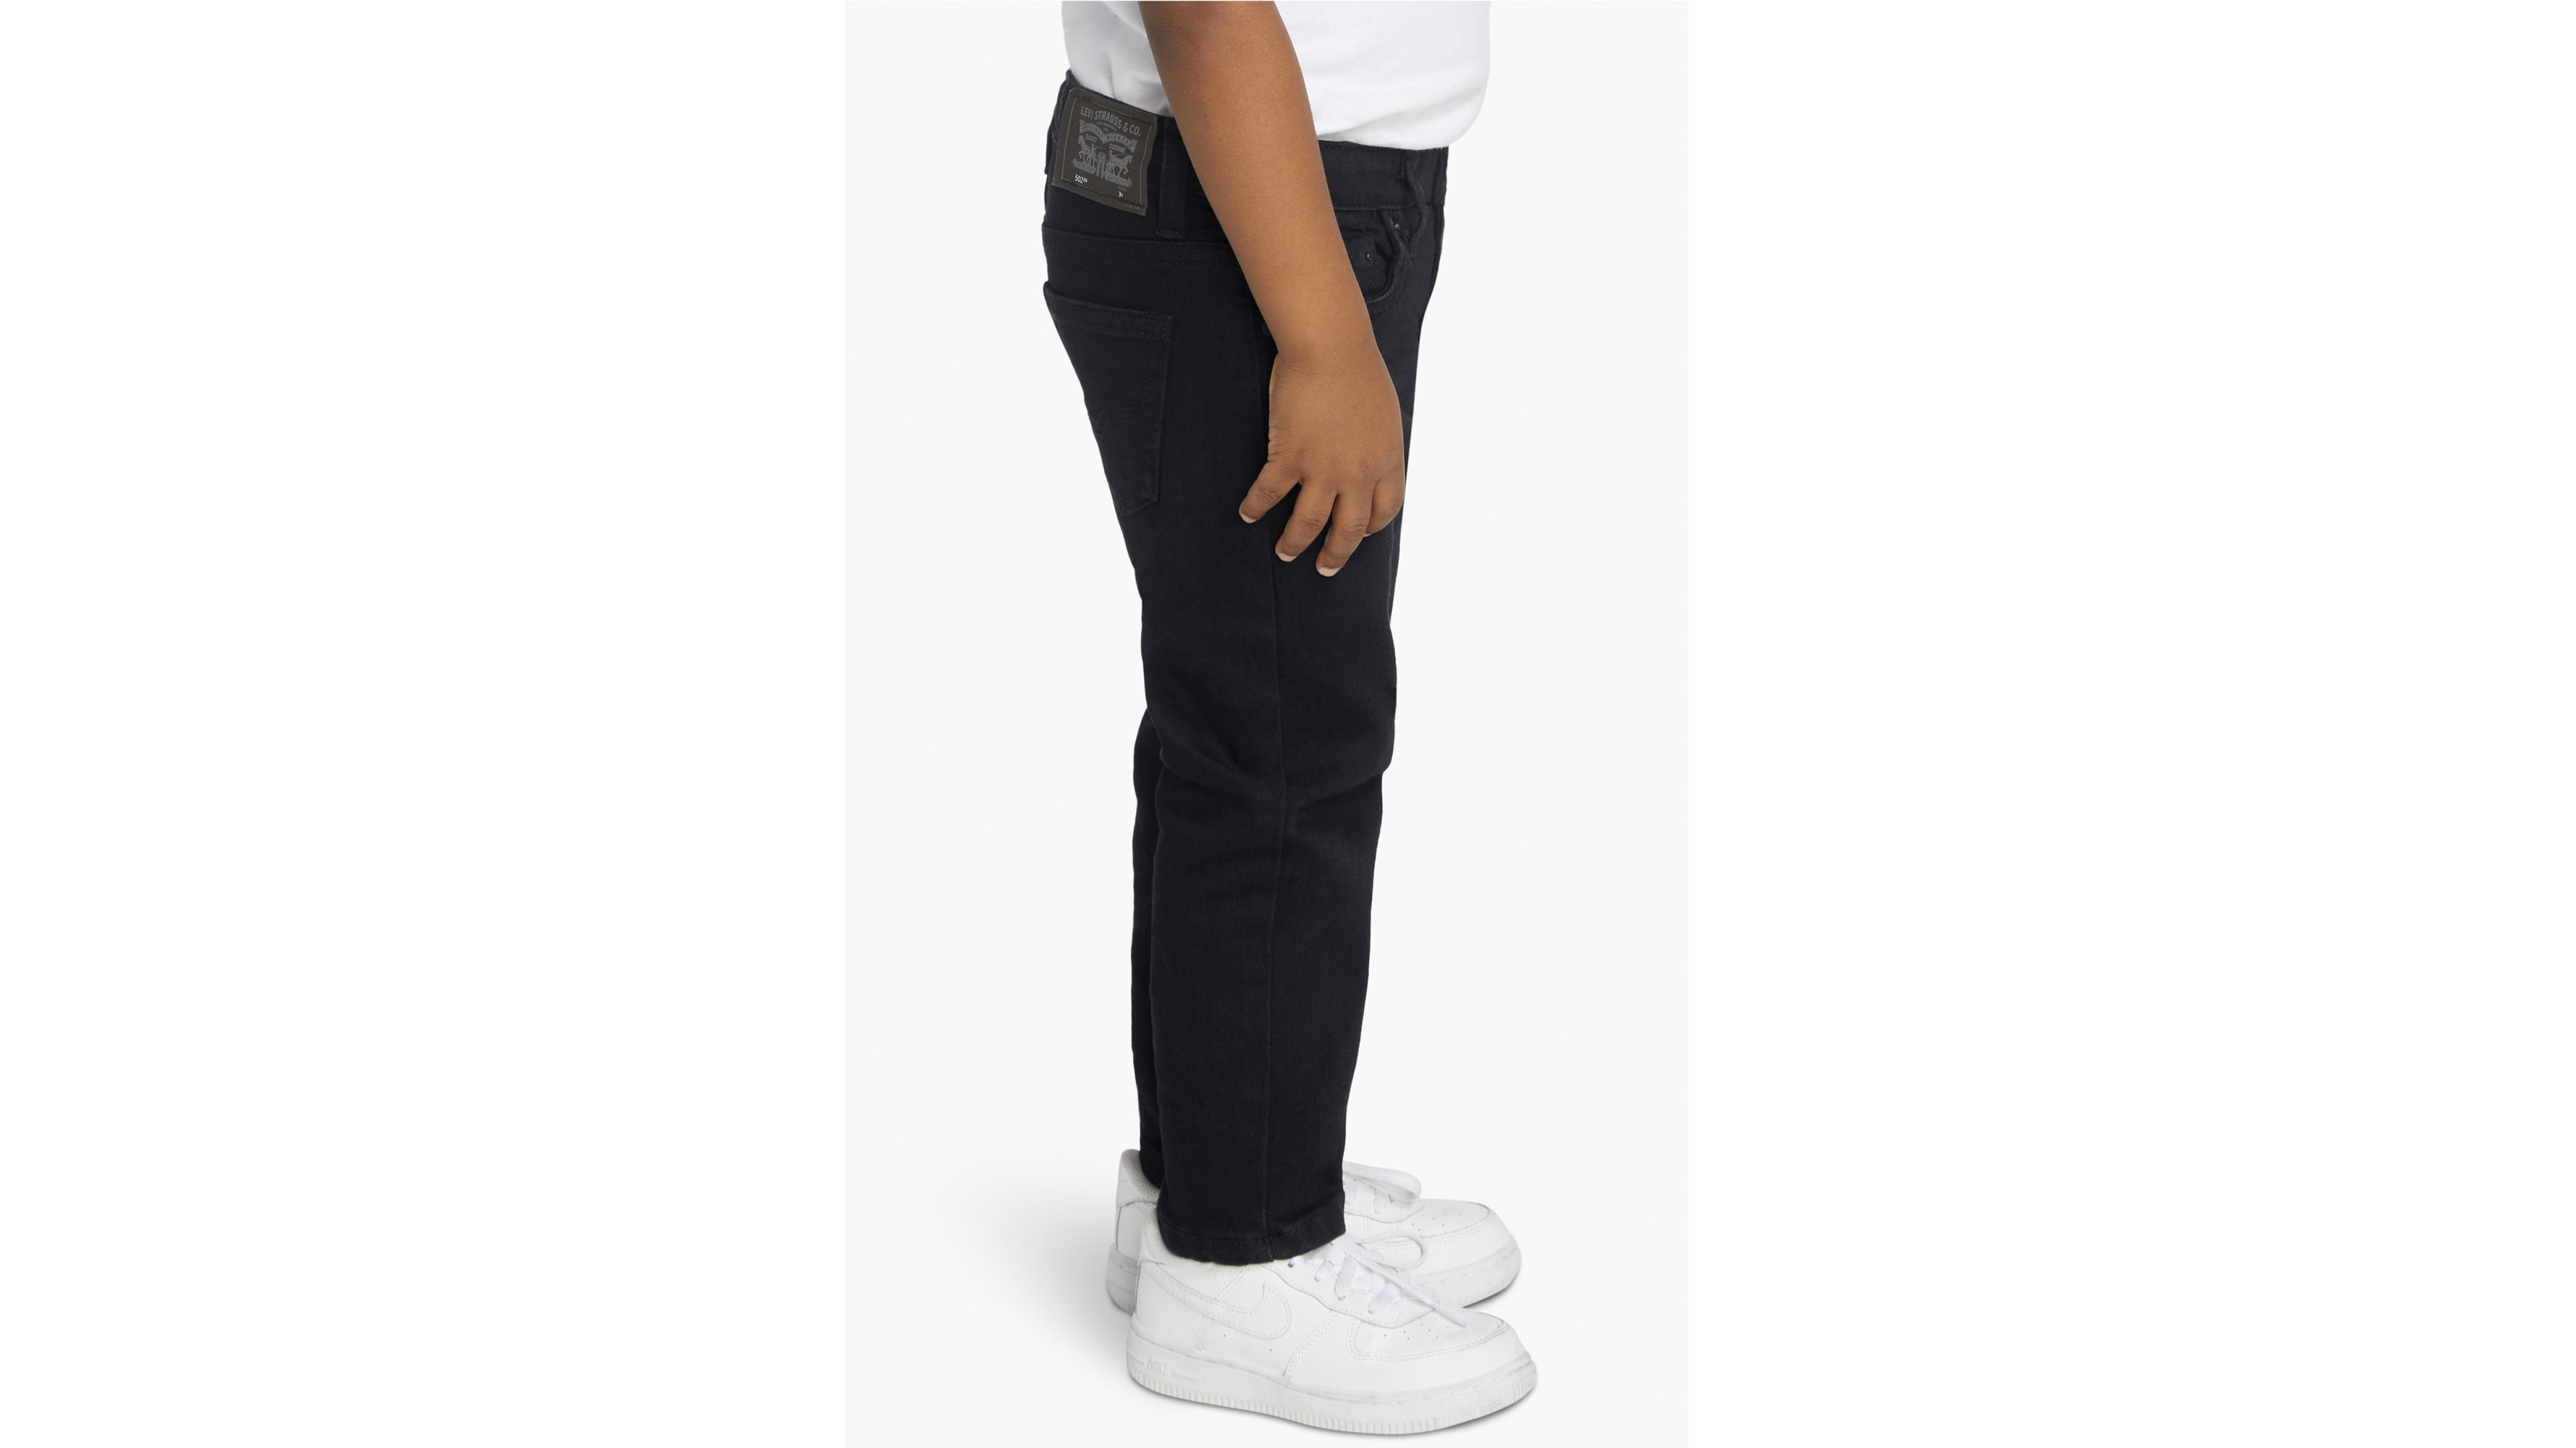 502™ Taper Fit Strong Performance Jeans Toddler Boys 2t-4t - Black